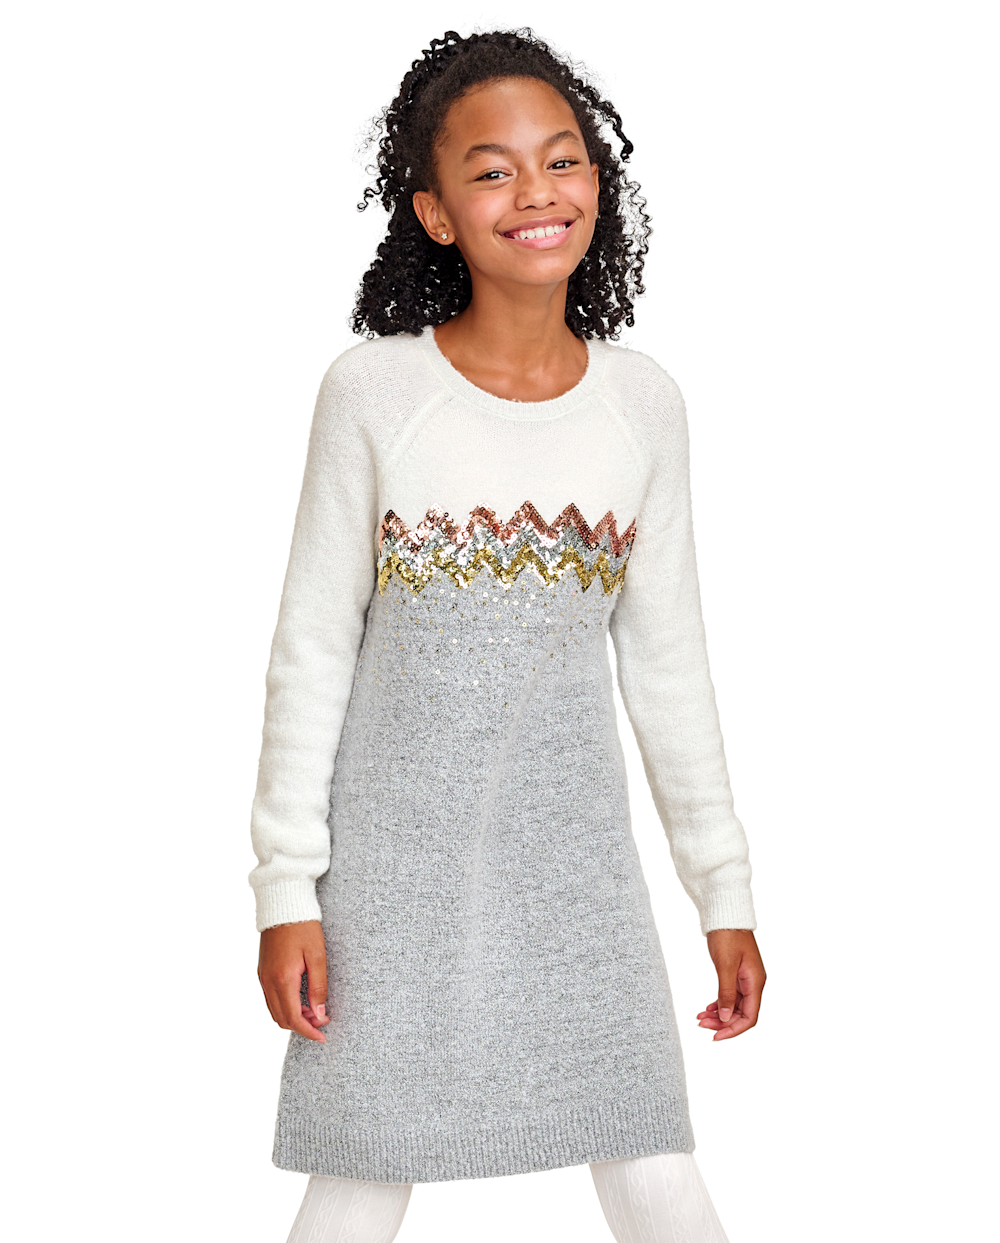 Girls Chevron Print Sweater Long Sleeves Sequined Crew Neck Above the Knee Dress